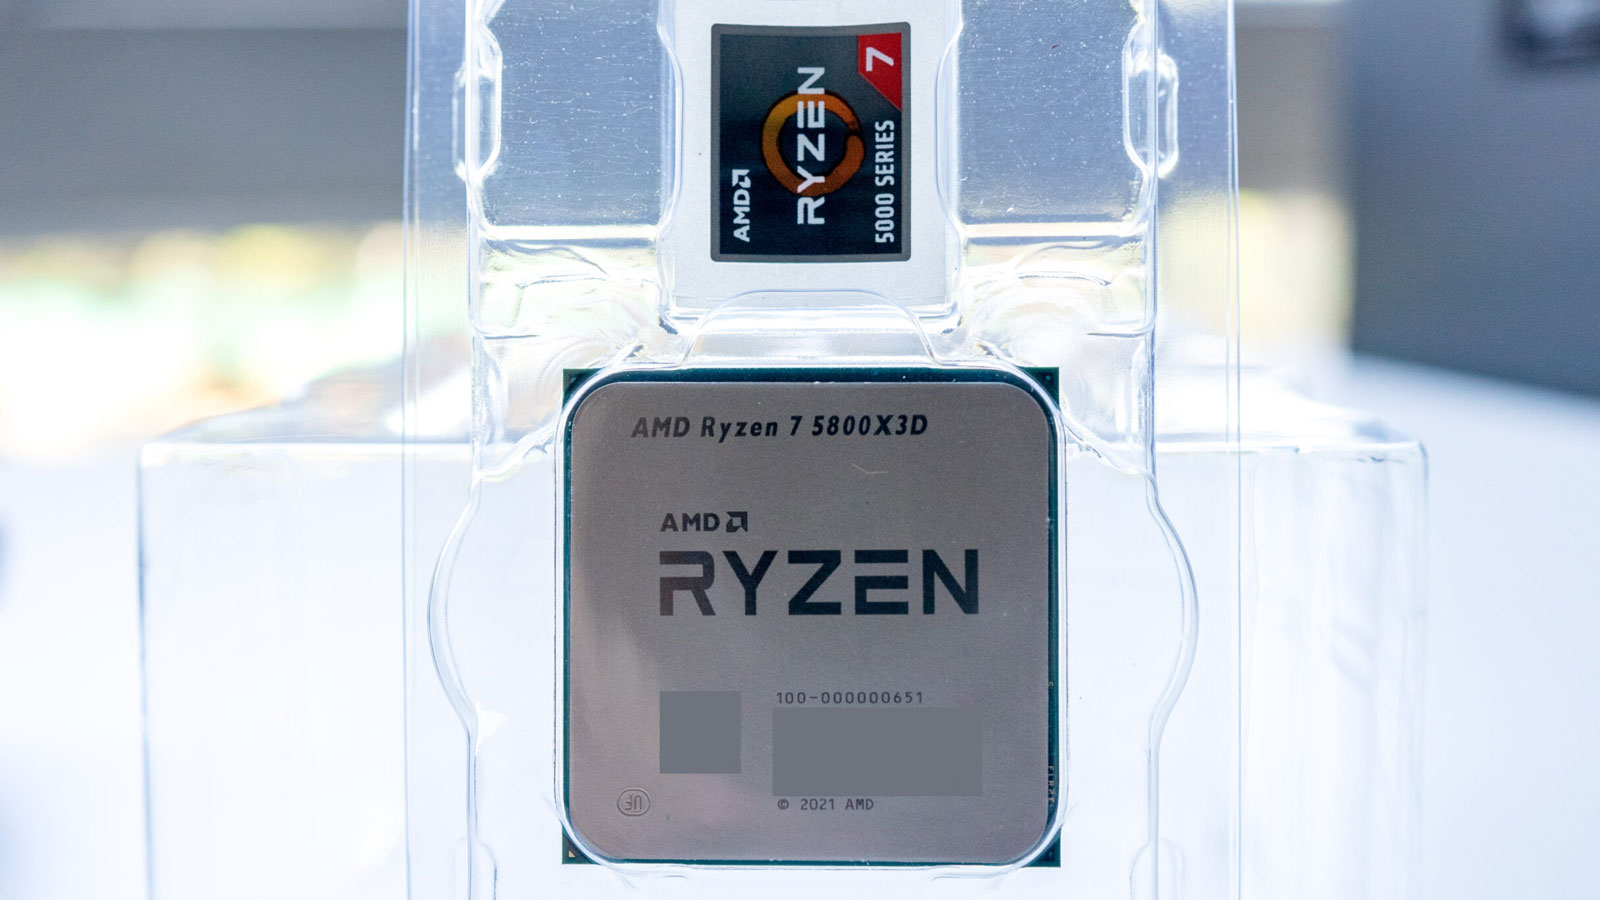 AMD's Ryzen 5800X3D is too flawed for consumer use - SemiAccurate